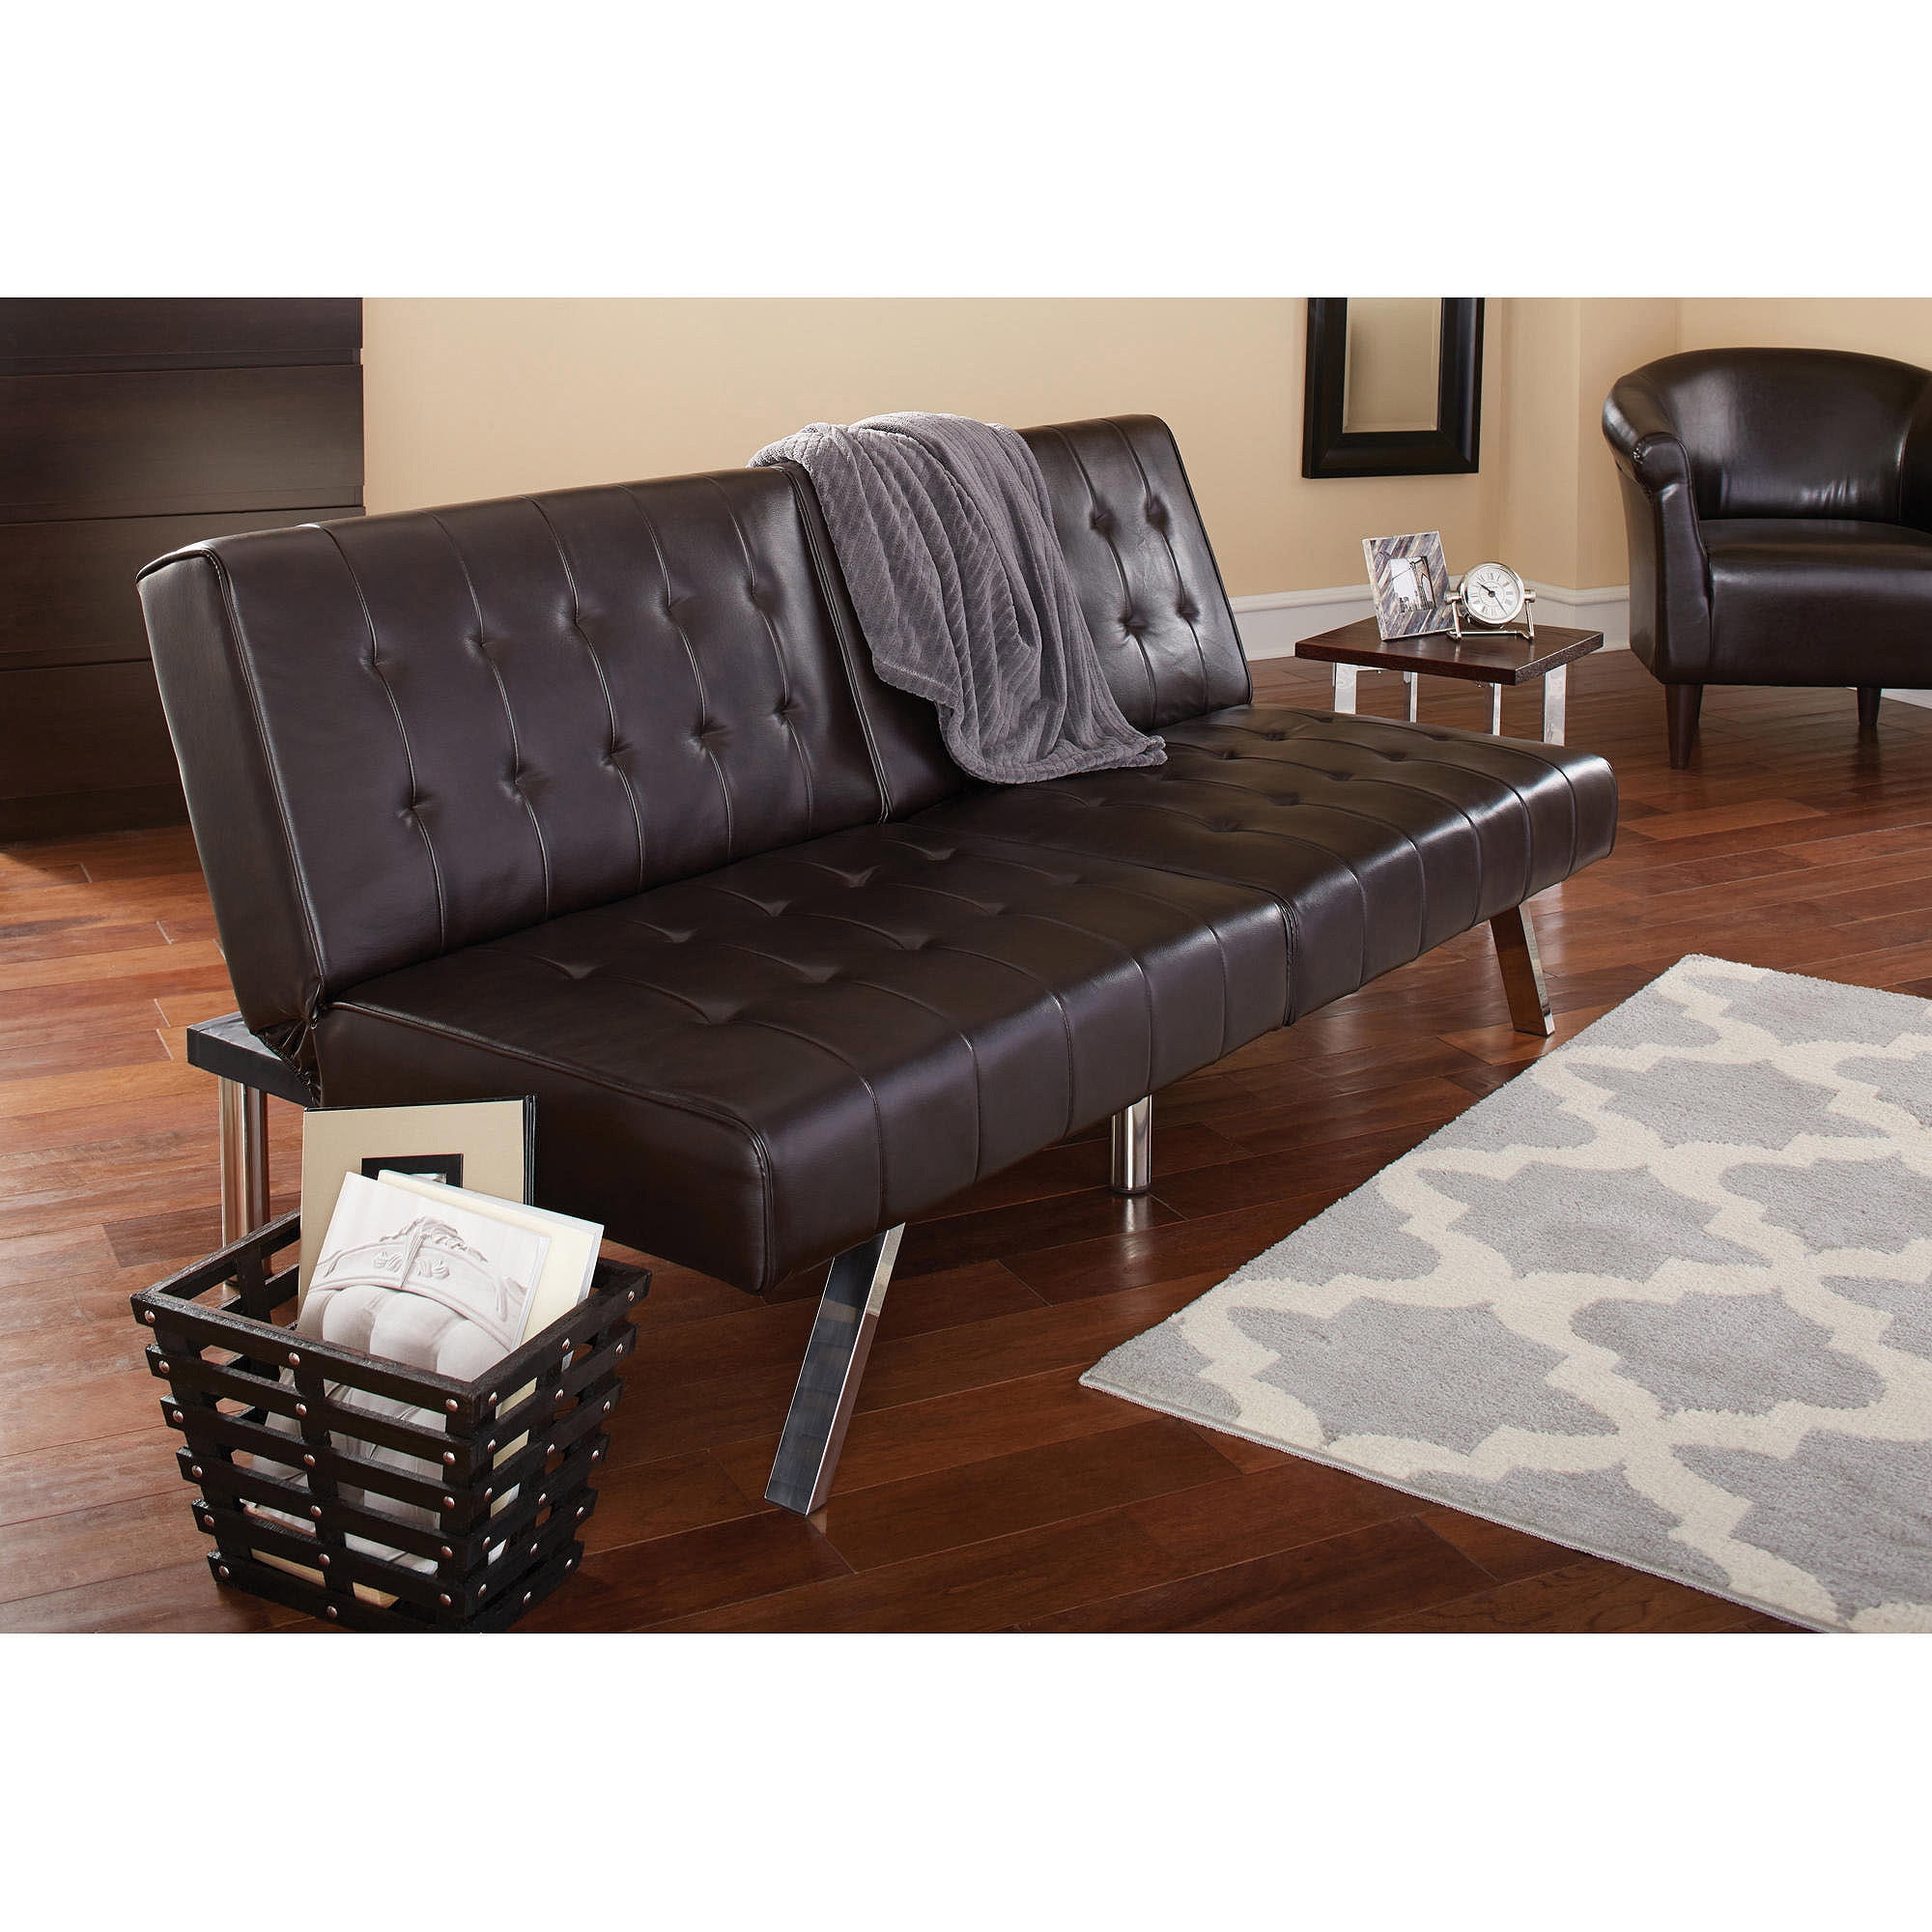 Mainstays Morgan Faux Leather Tufted Convertible Futon Brown